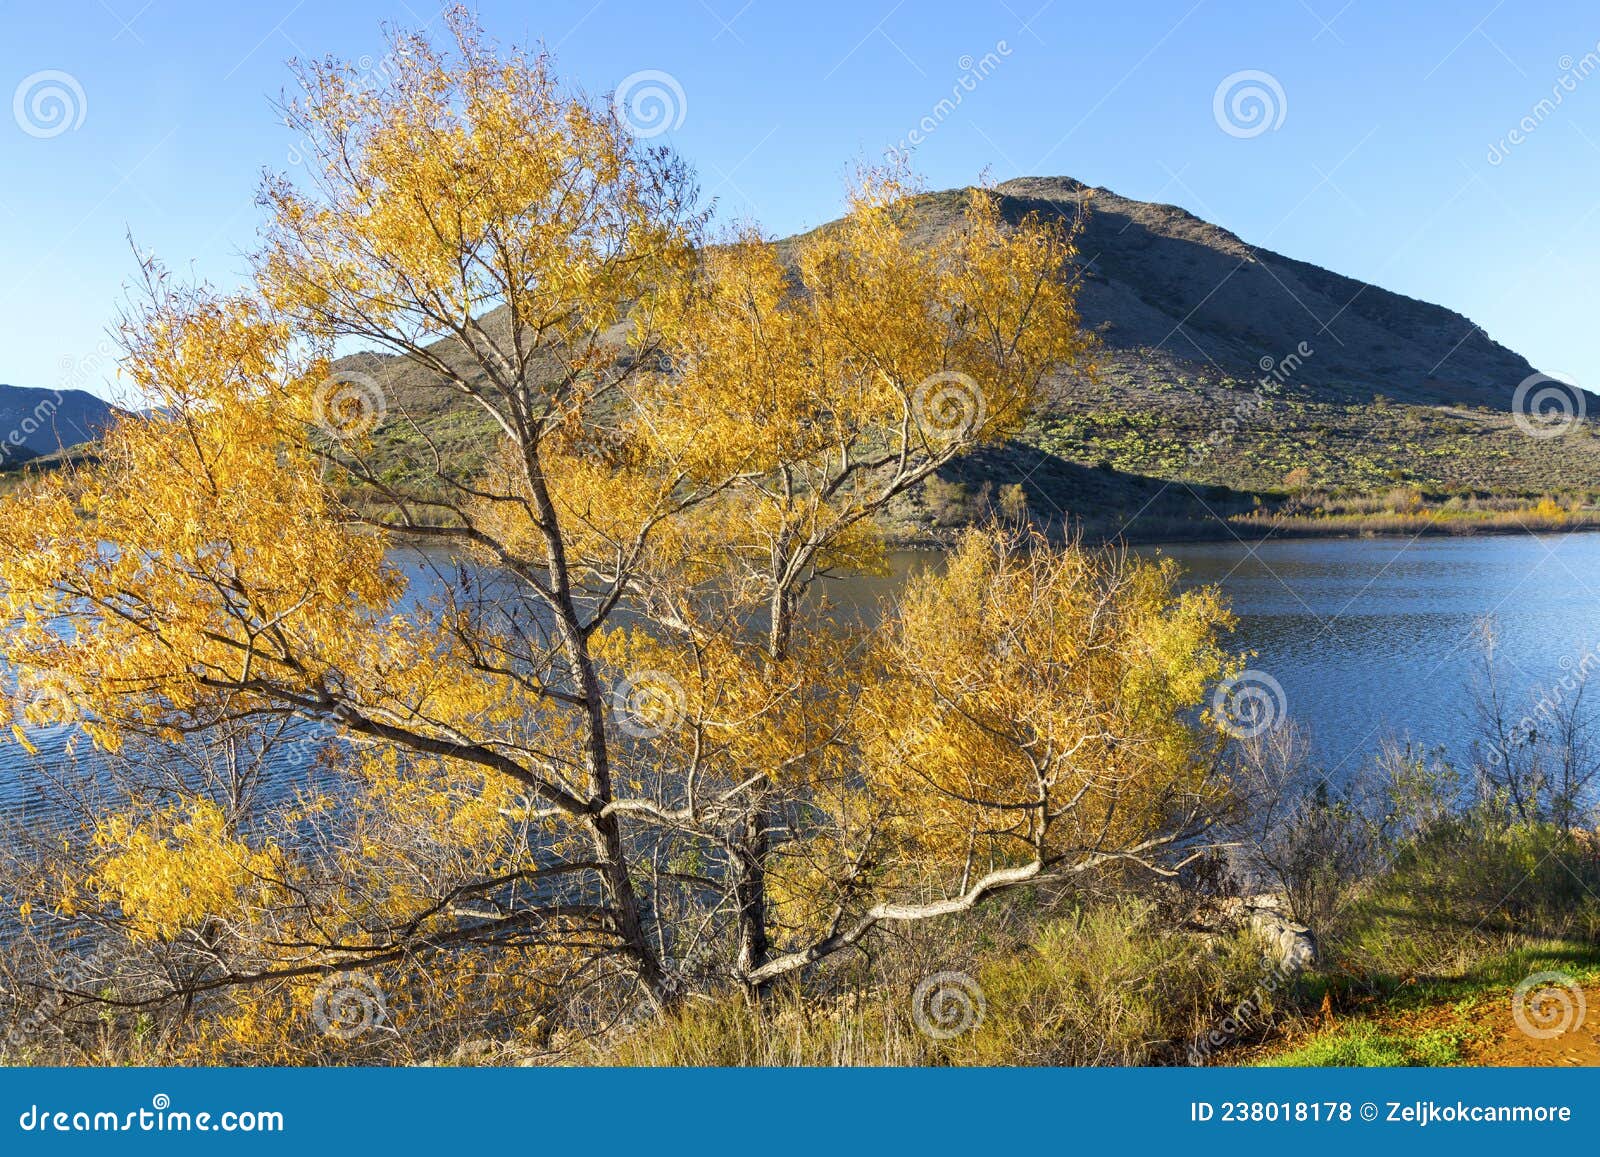 sycamore tree with yellow leafs, scenic lake hodges and bernardo mountain